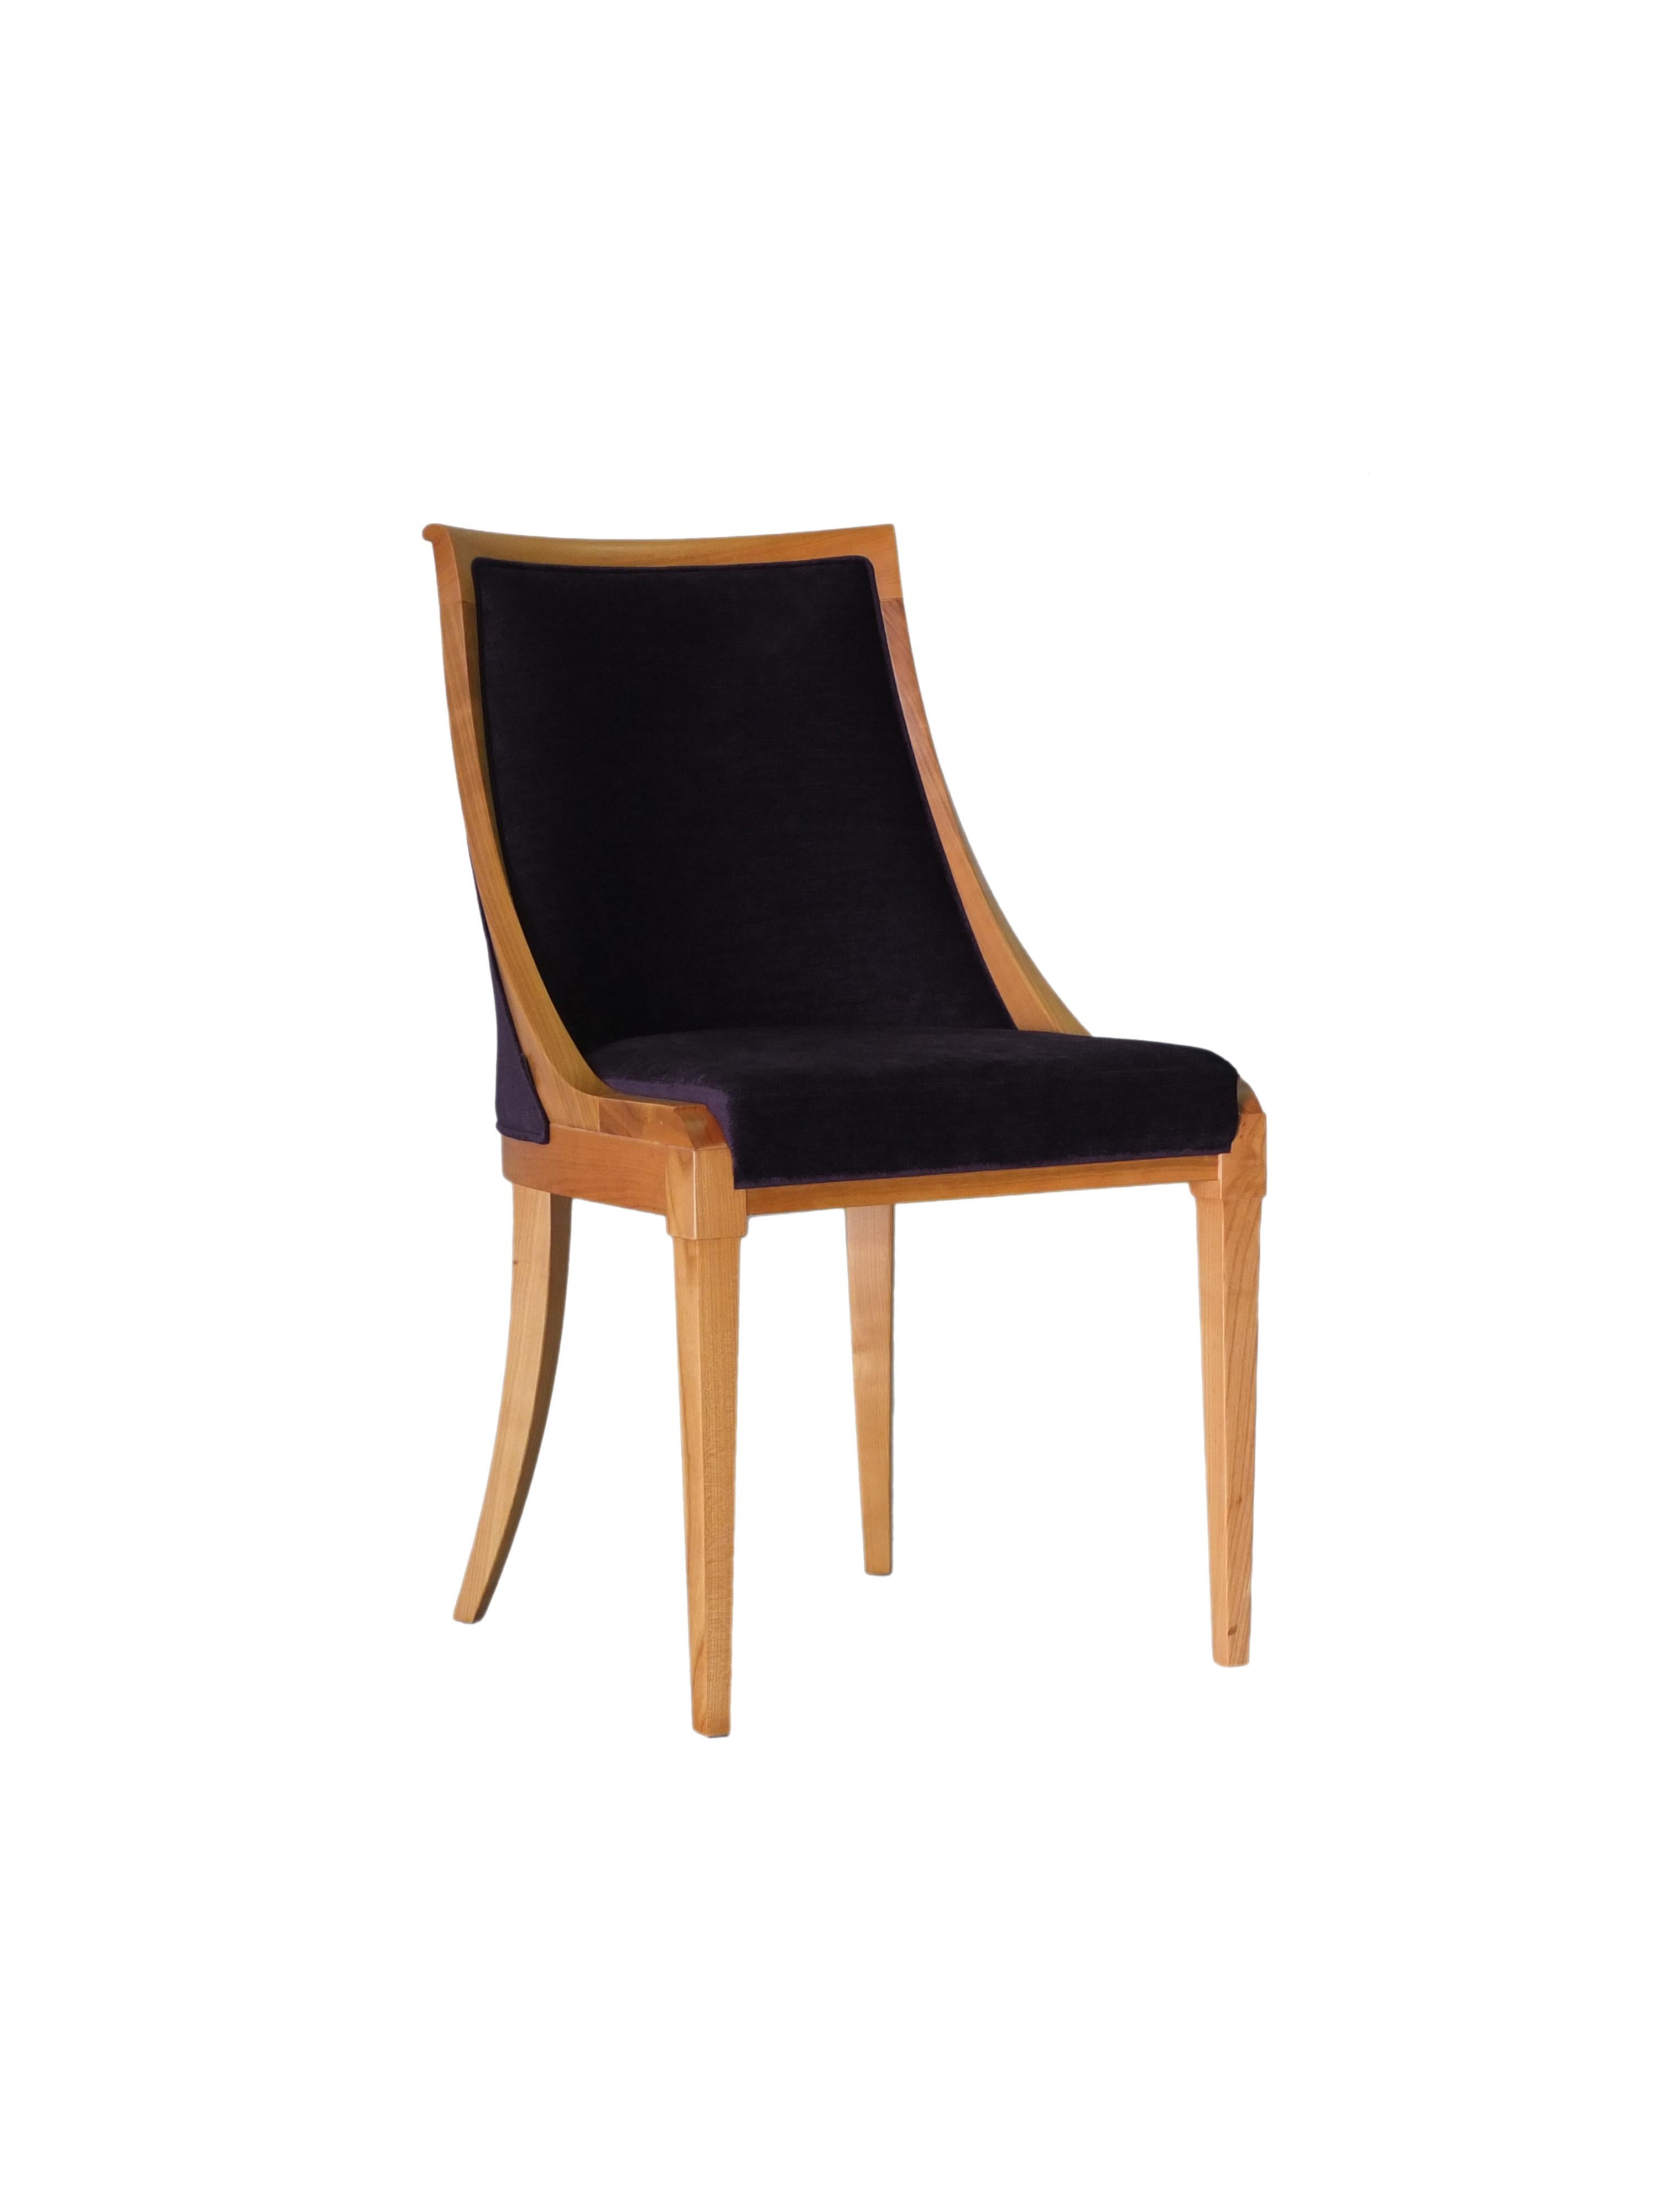 Italian Musa, Upholstered Chair Made of Cherrywood For Sale